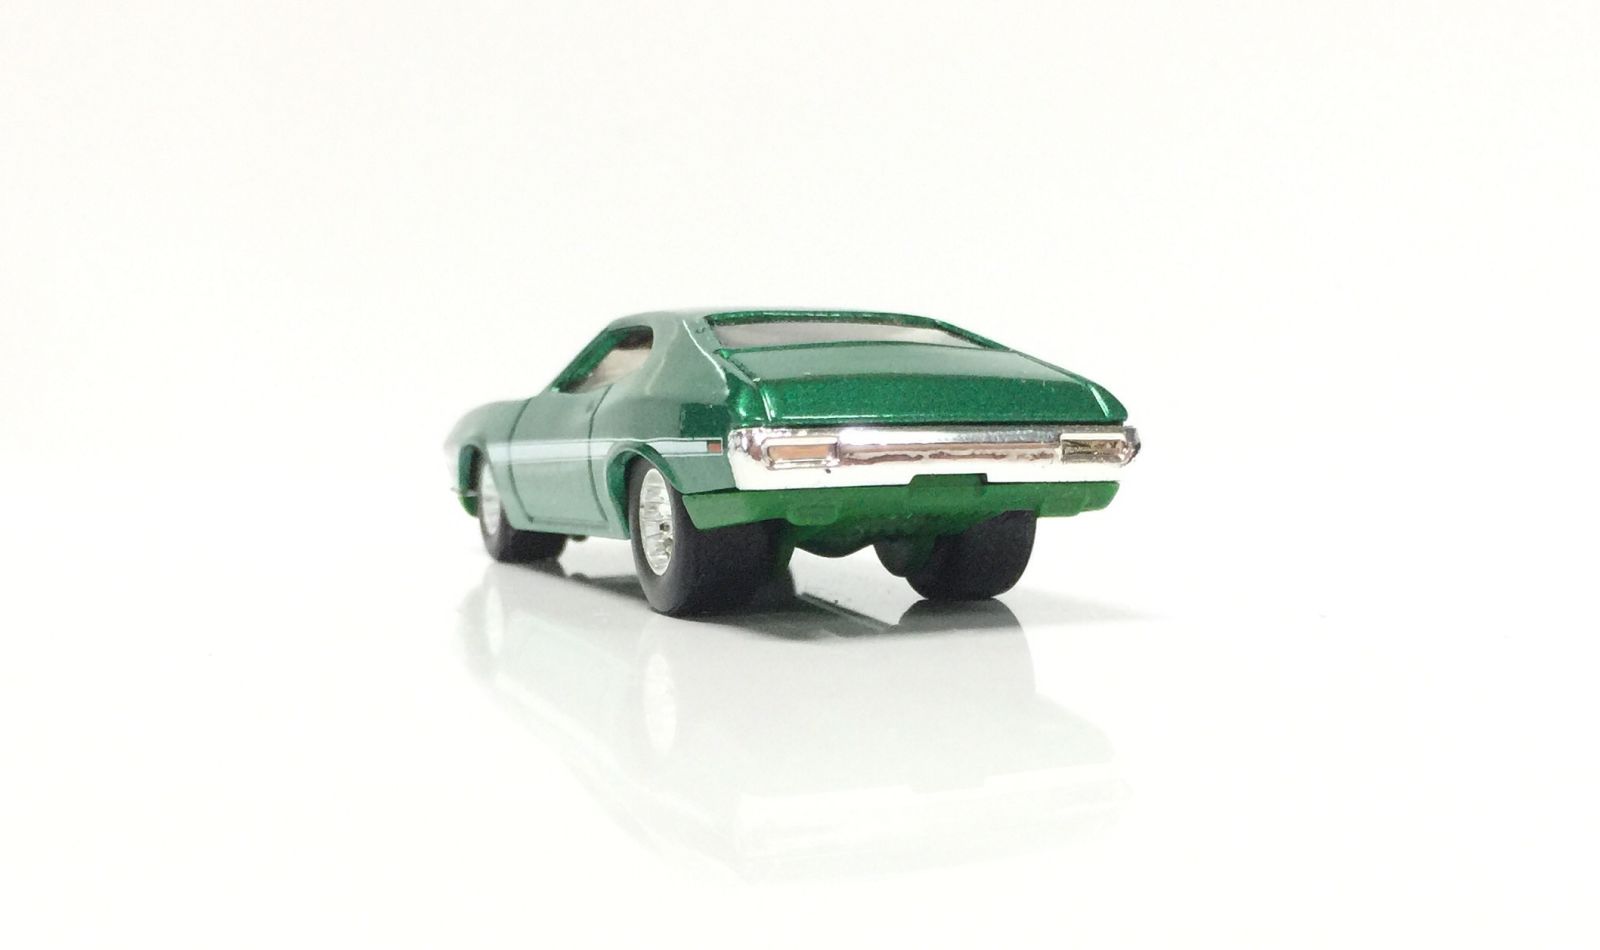 Illustration for article titled Quick Wheel swap: 72 Grand Torino Sport